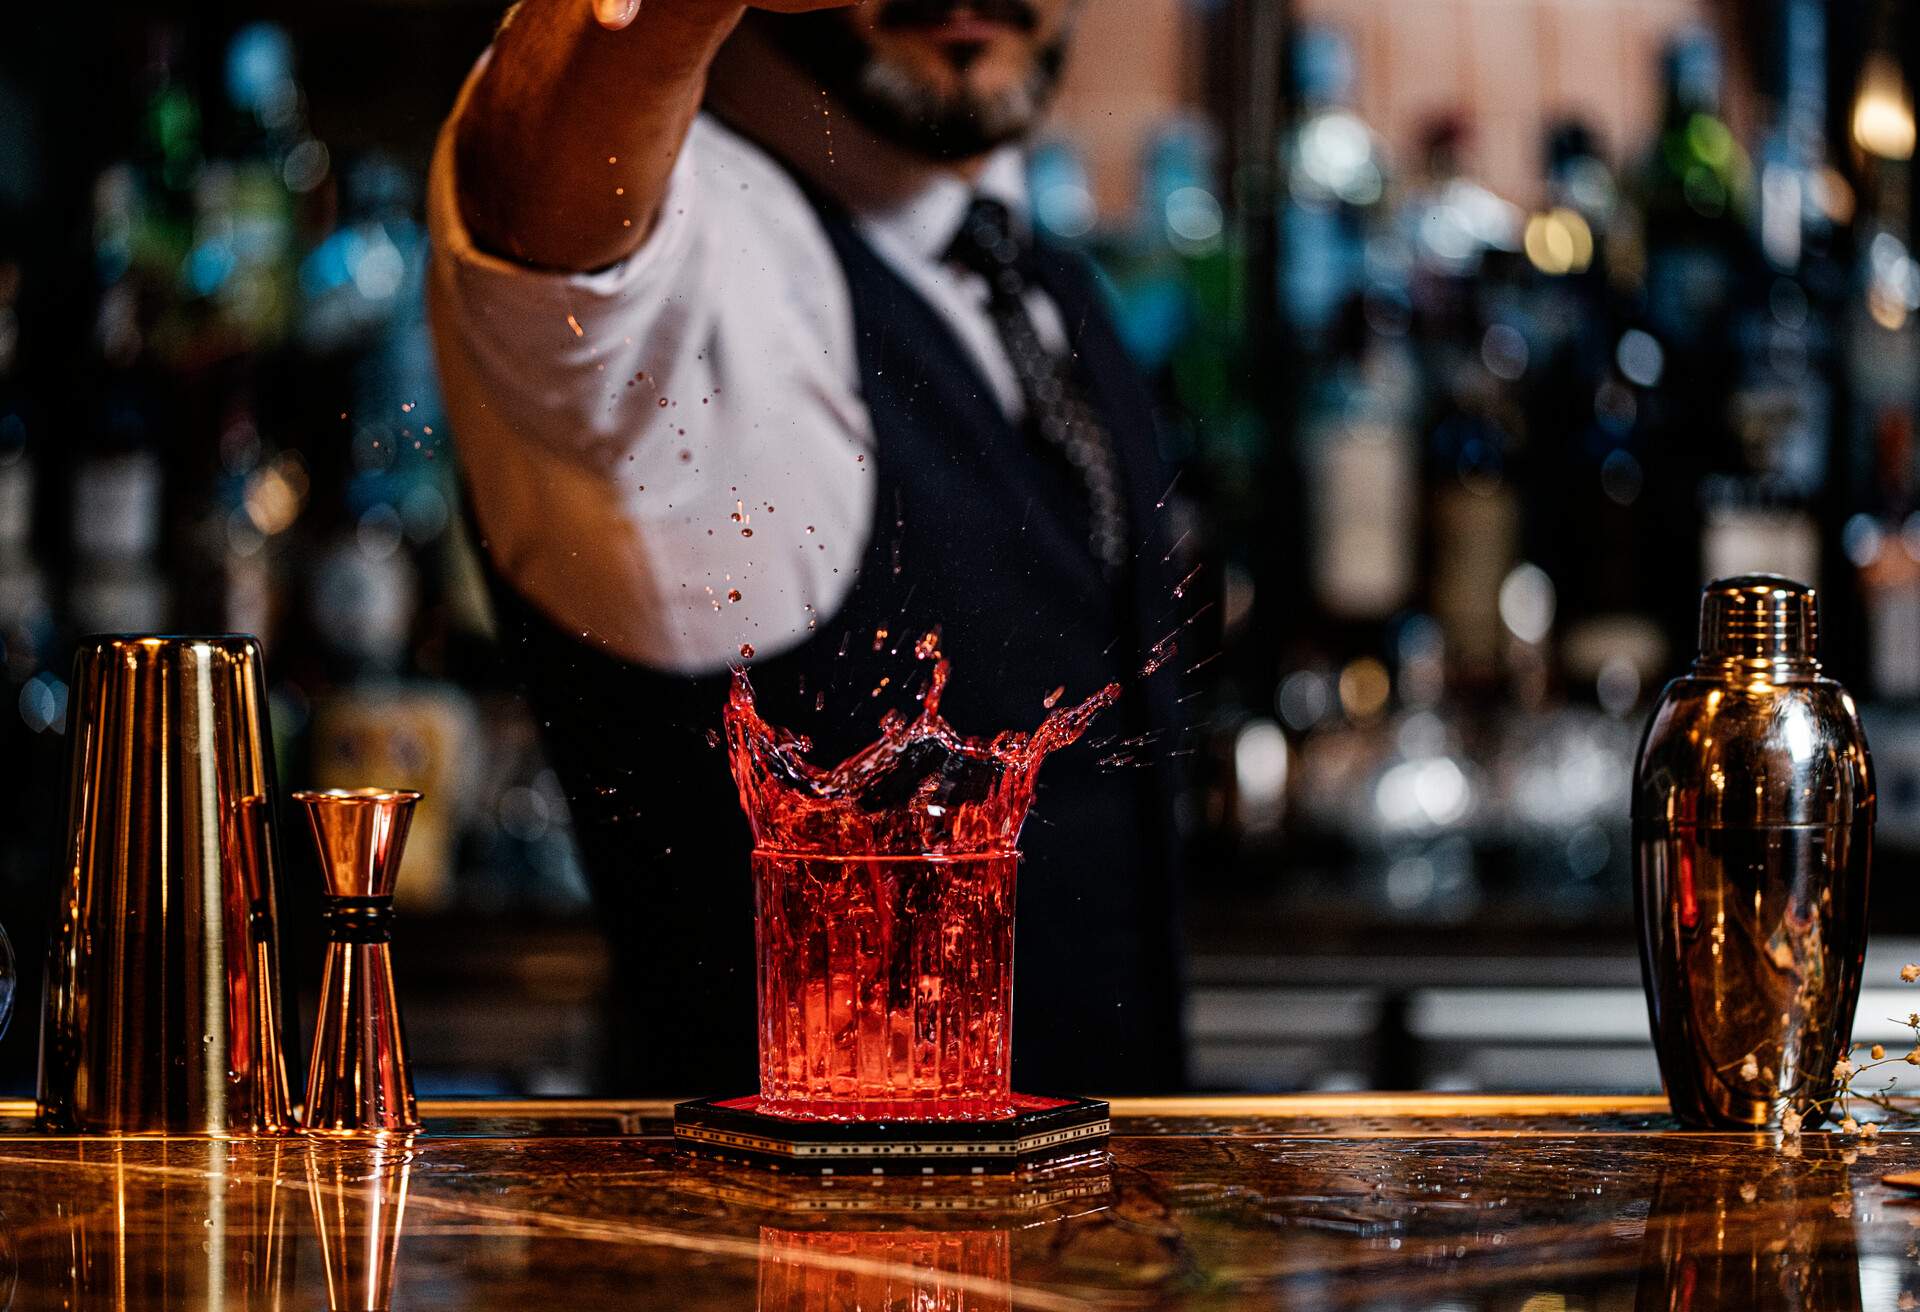 A male bartender pouring a red cocktail drink into a glass.